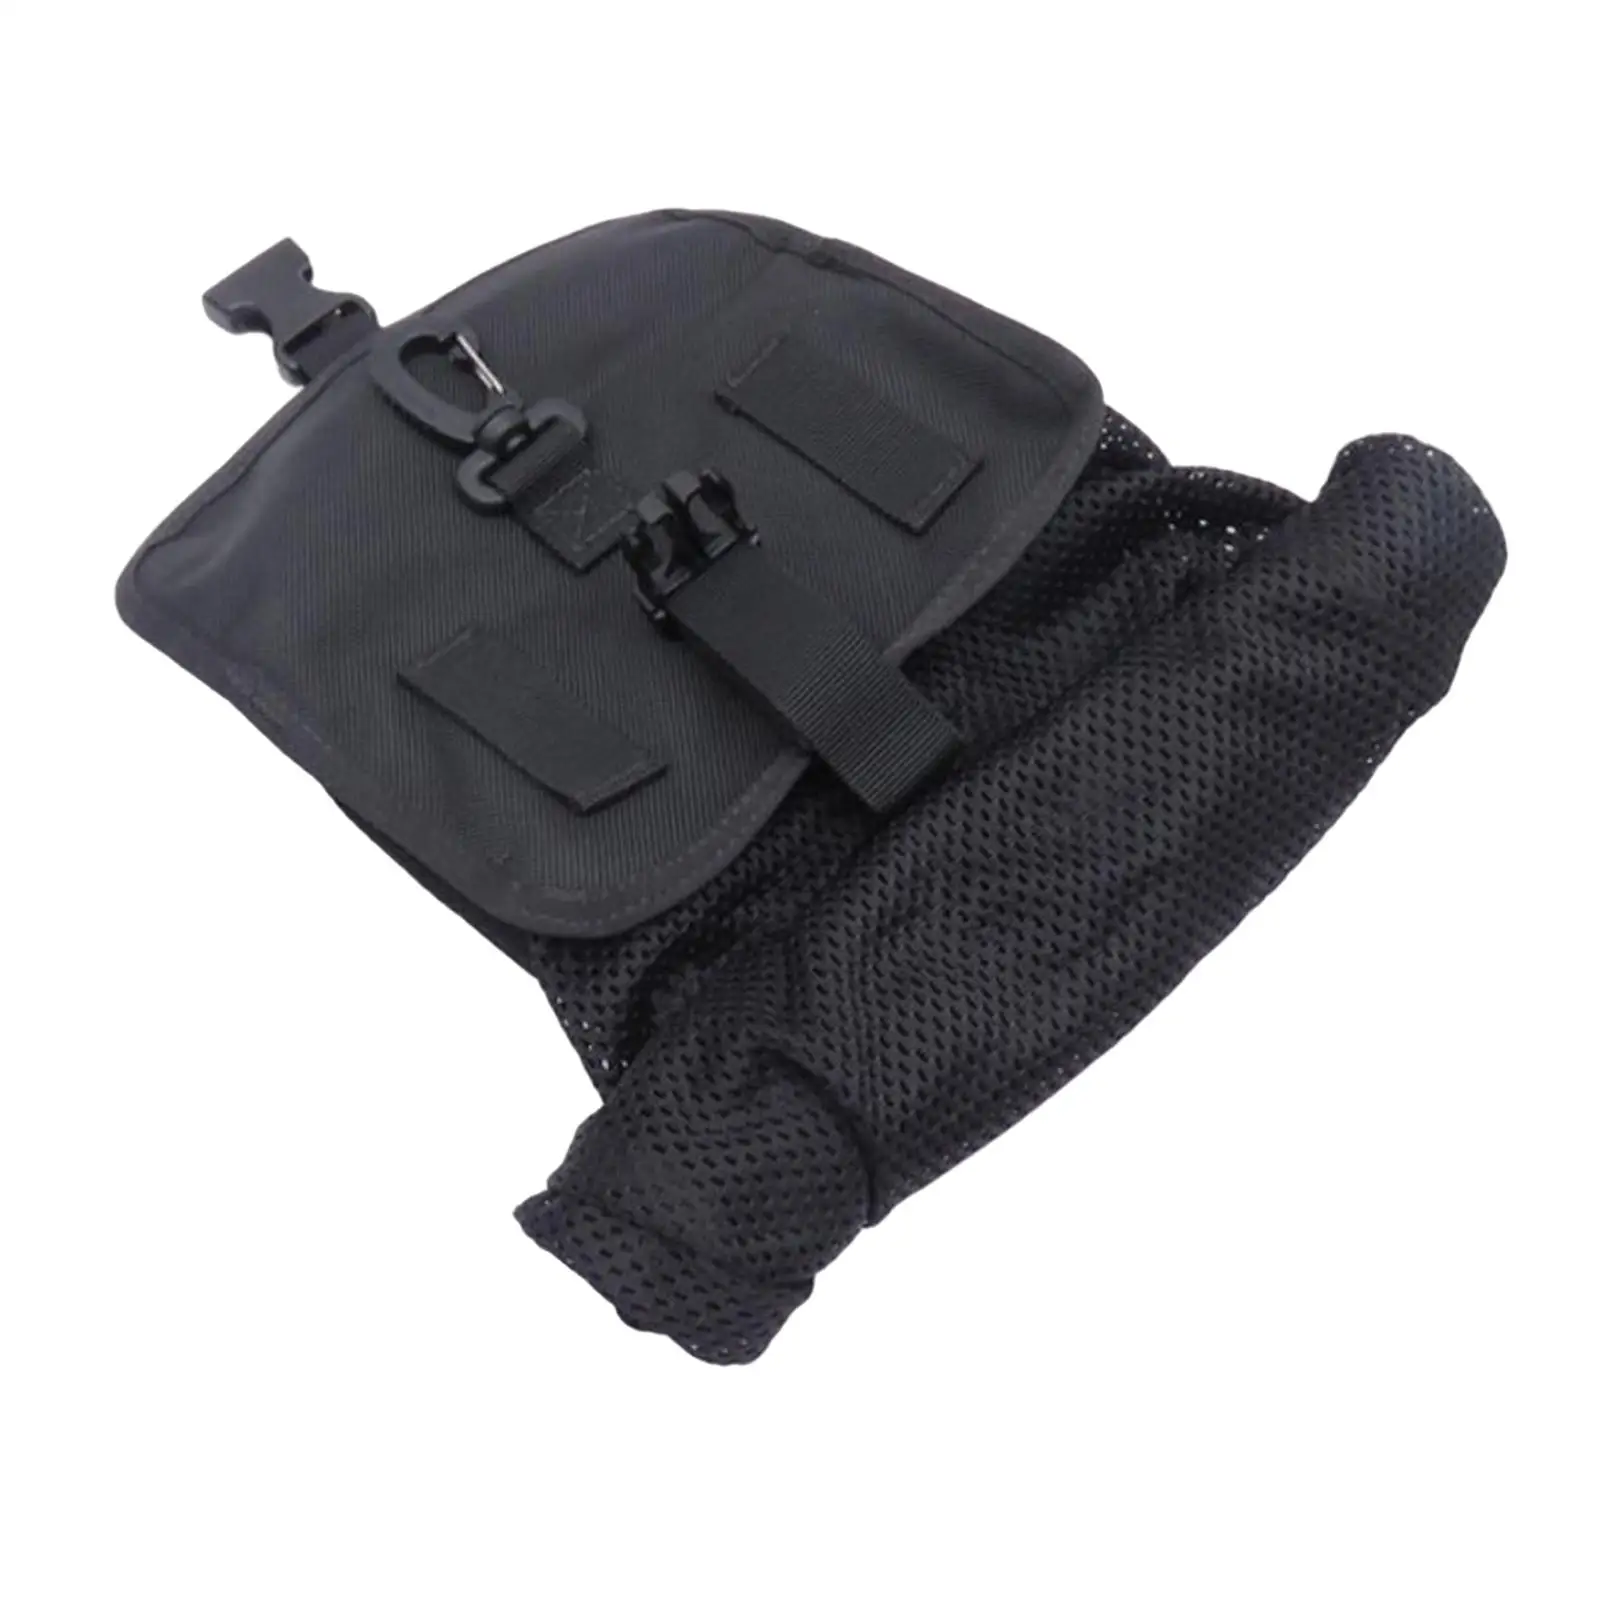 Durable Gear Bag Storage Holder Pack Carry Nylon Scuba Diving Mesh Pouch for Underwater Gears Snorkel Keys Flashlight